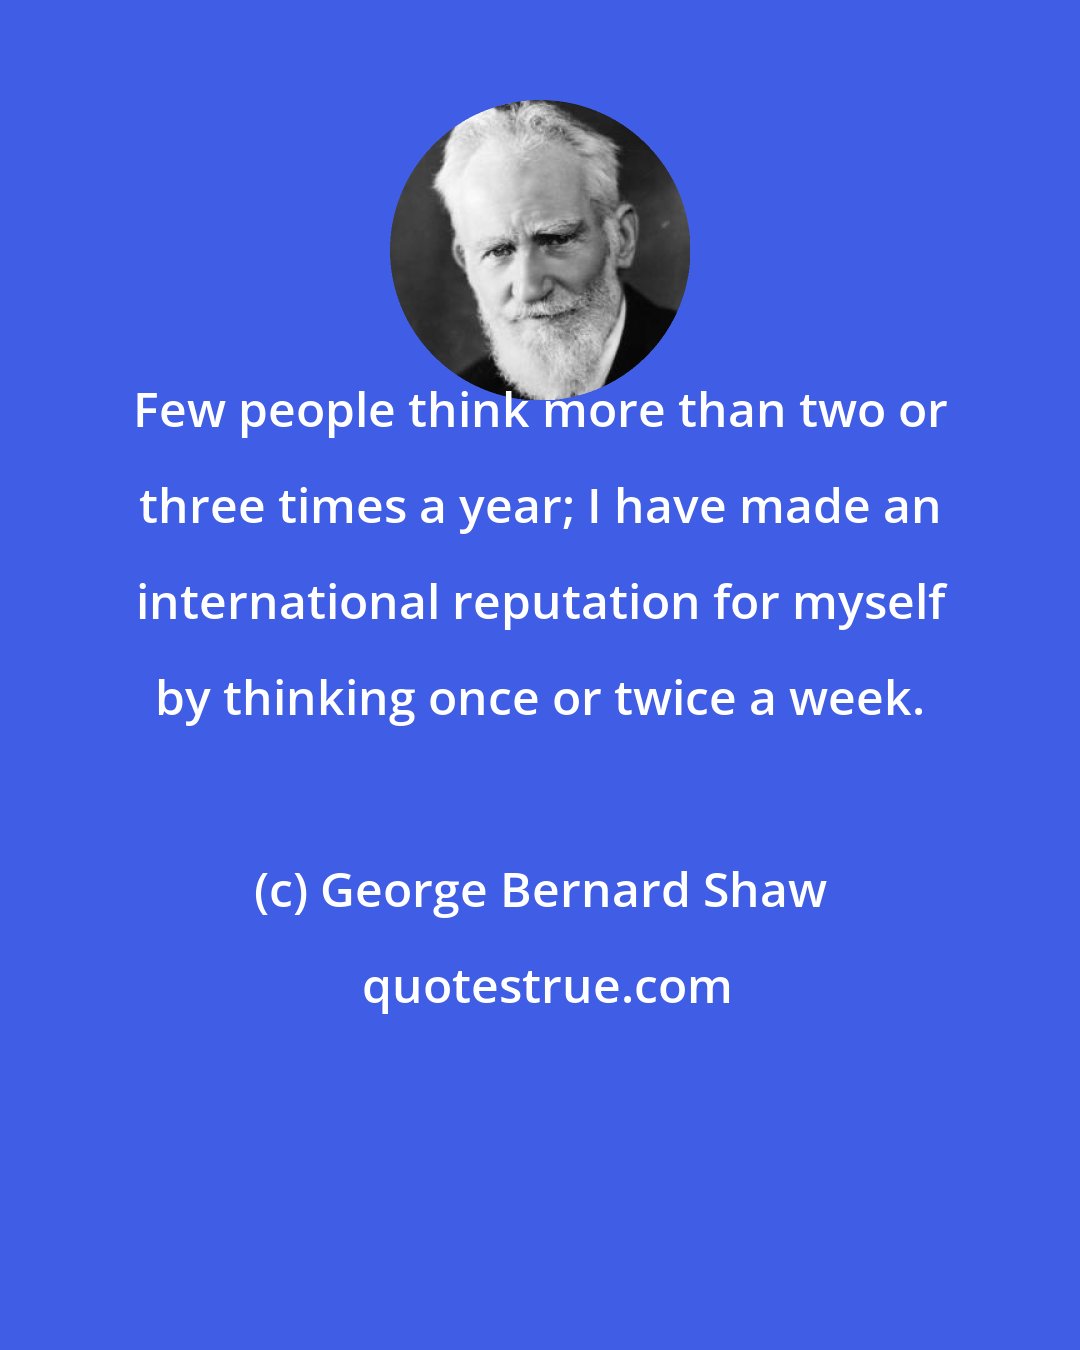 George Bernard Shaw: Few people think more than two or three times a year; I have made an international reputation for myself by thinking once or twice a week.